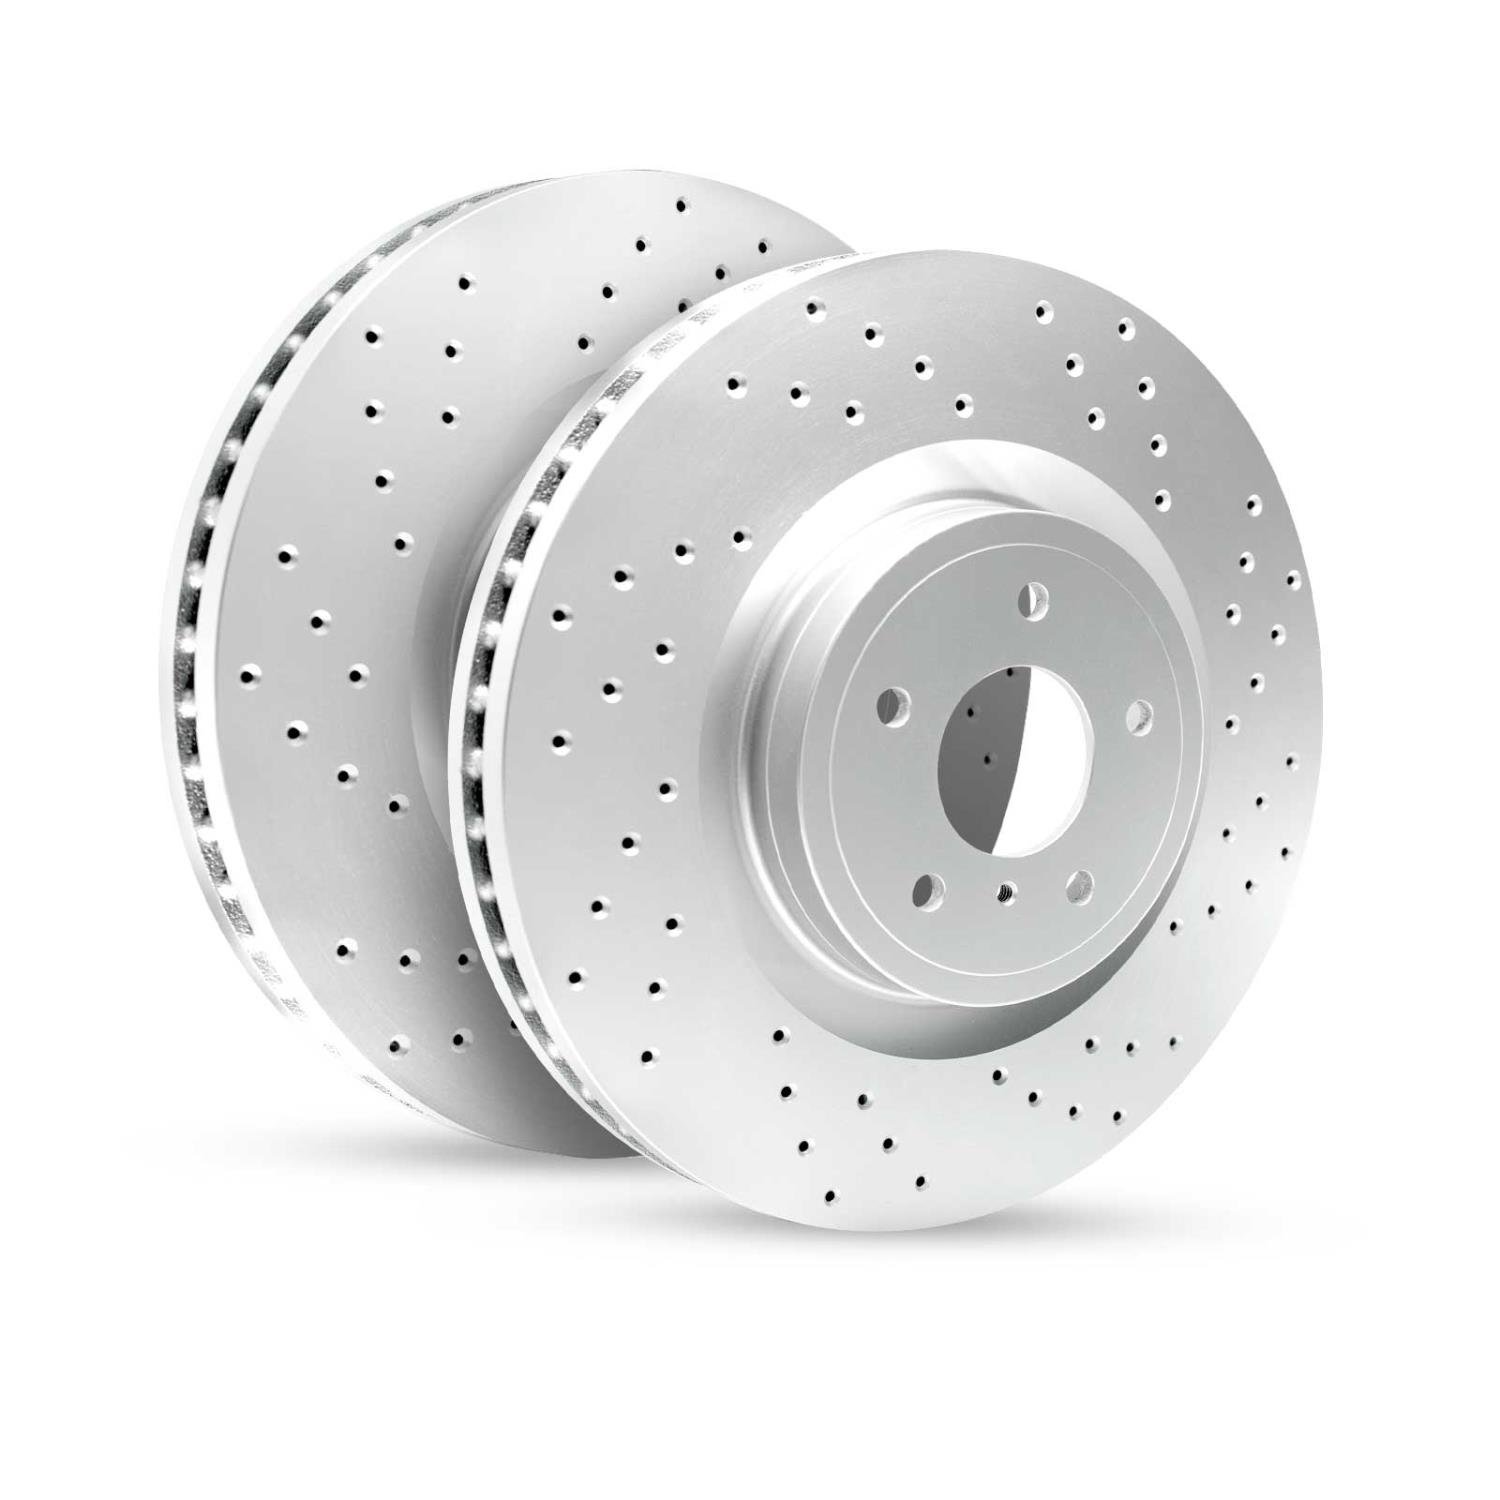 GEO-Carbon Drilled/Slotted Rotors, 2001-2004 Fits Multiple Makes/Models, Position: Front